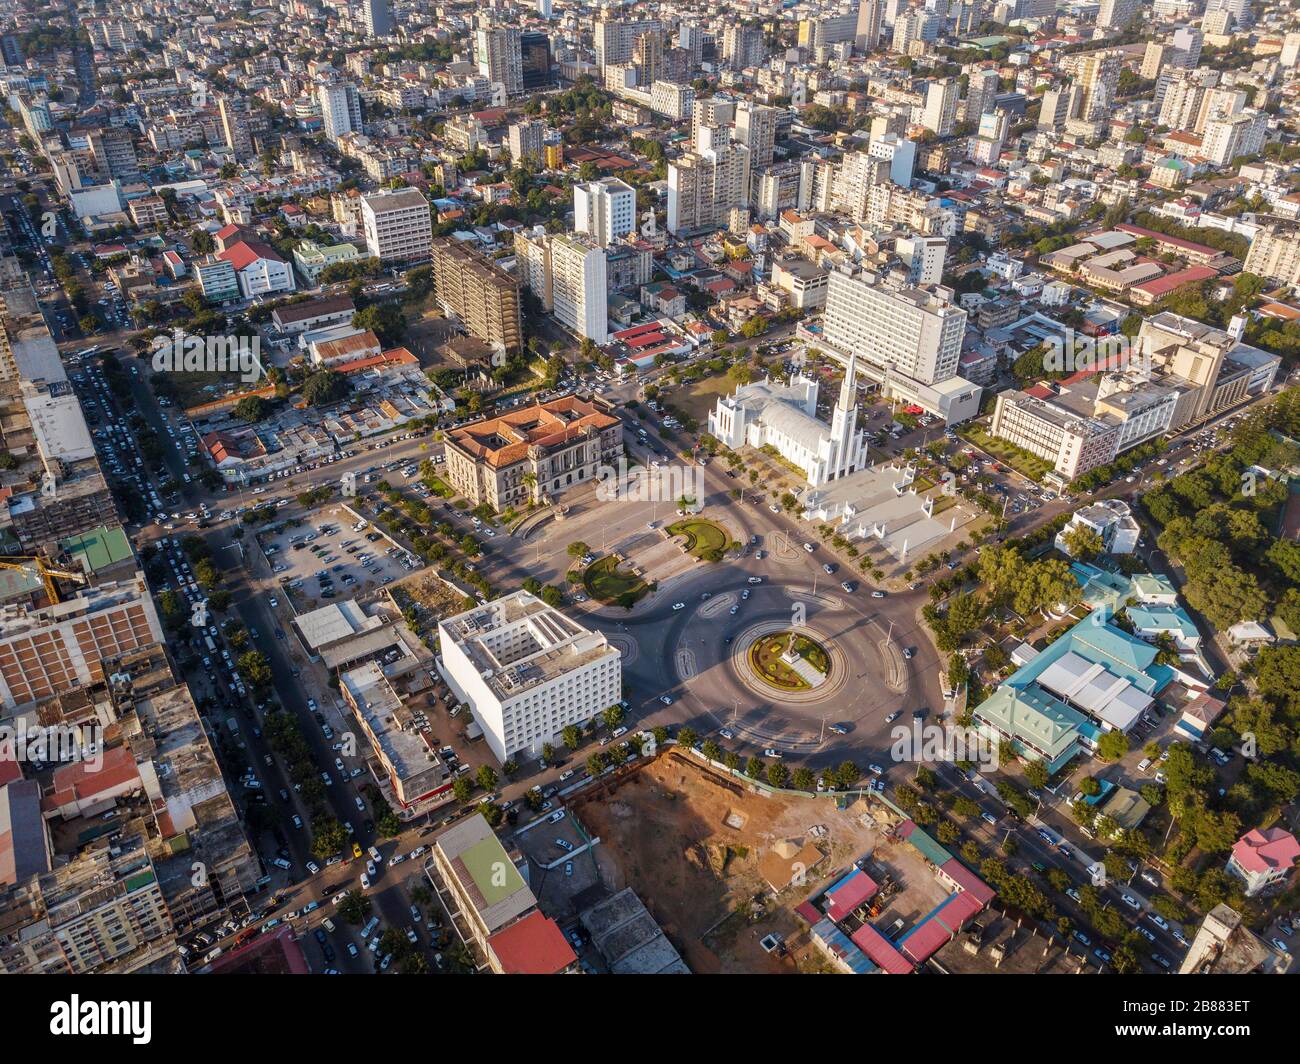 Aerial view of Independance Square in Maputo, capital city of Mozambique, Mozambique Stock Photo